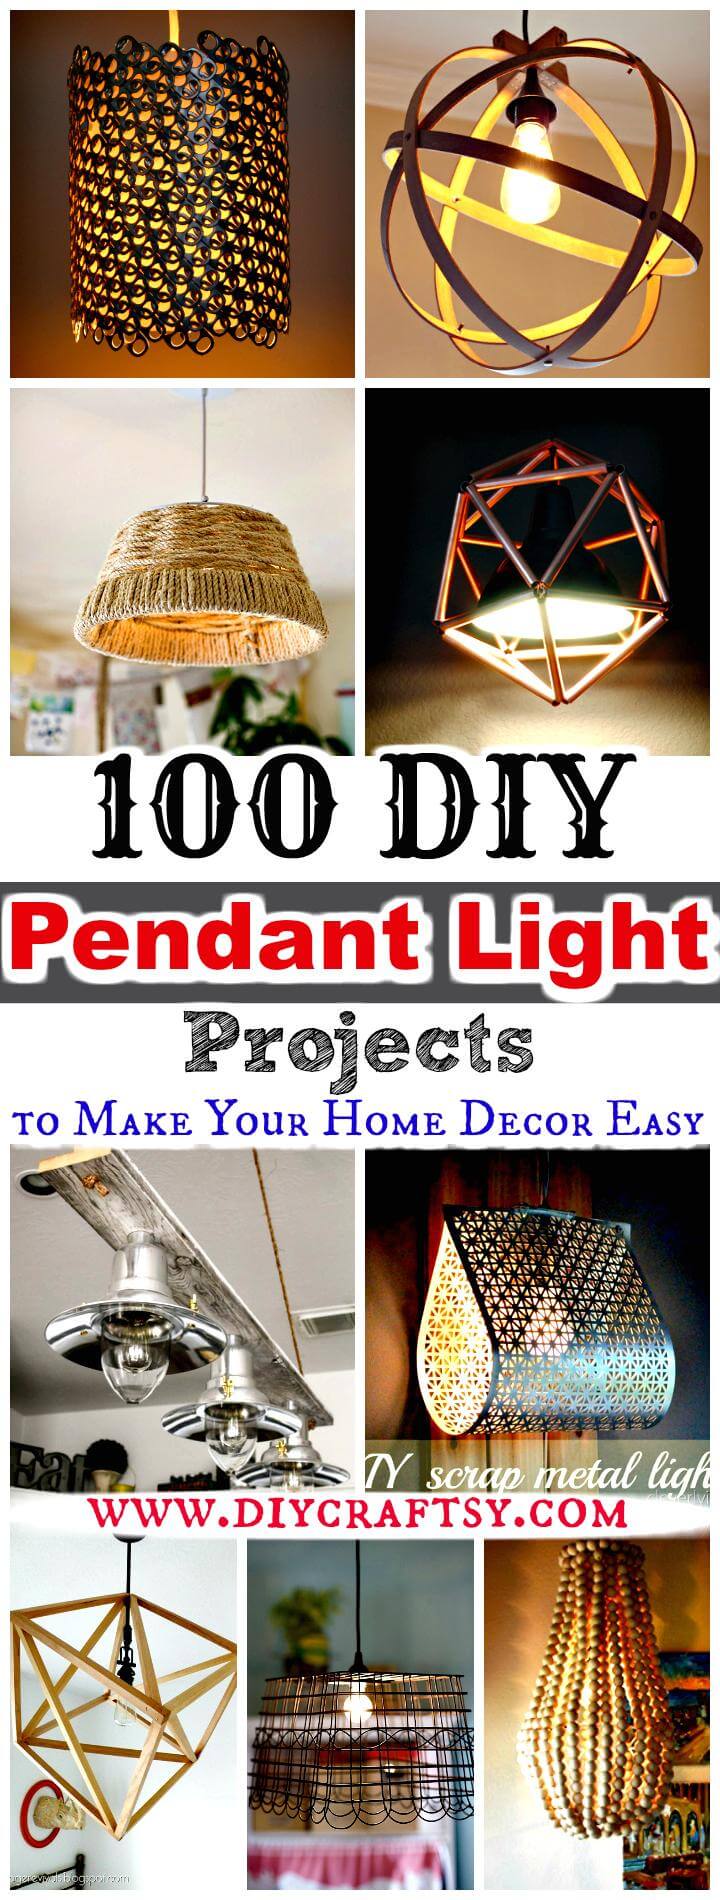 100-DIY-Pendant-Light-Projects-to-Make-Your-Home-Decoration-Easy